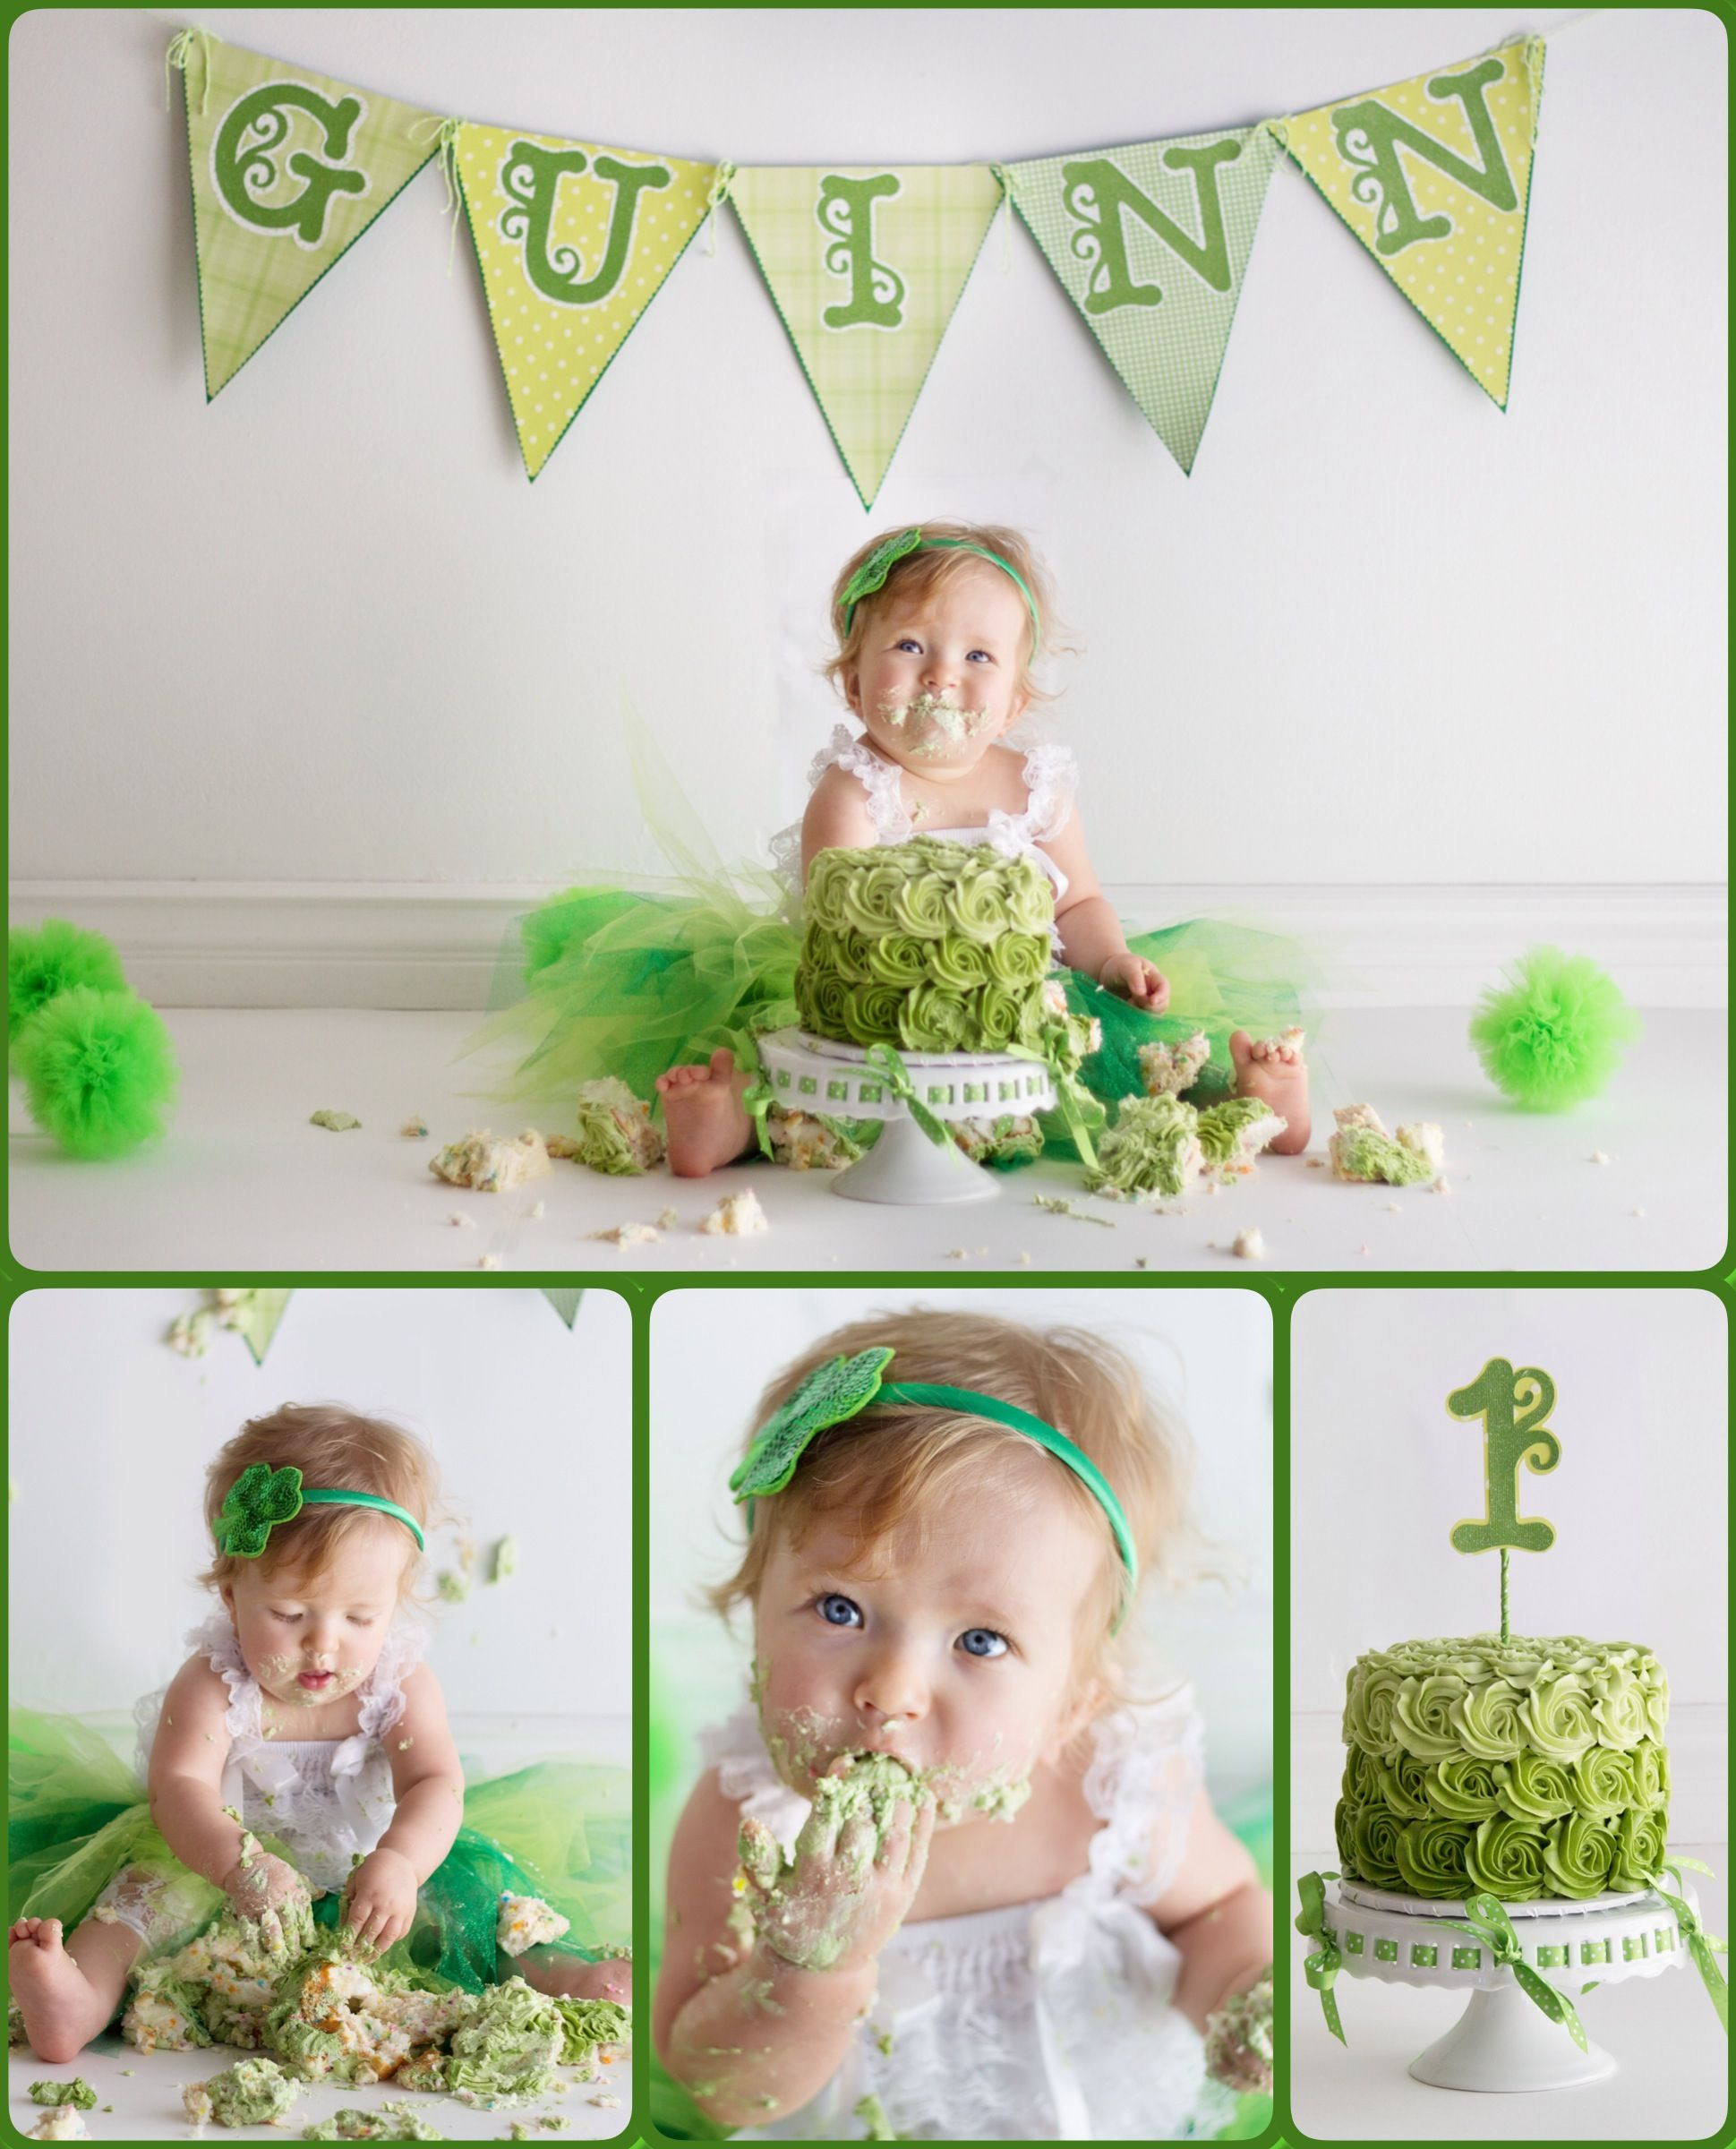 St Patrick's Day Baby Picture Ideas
 Smash the Cake St Patrick s Day Baby